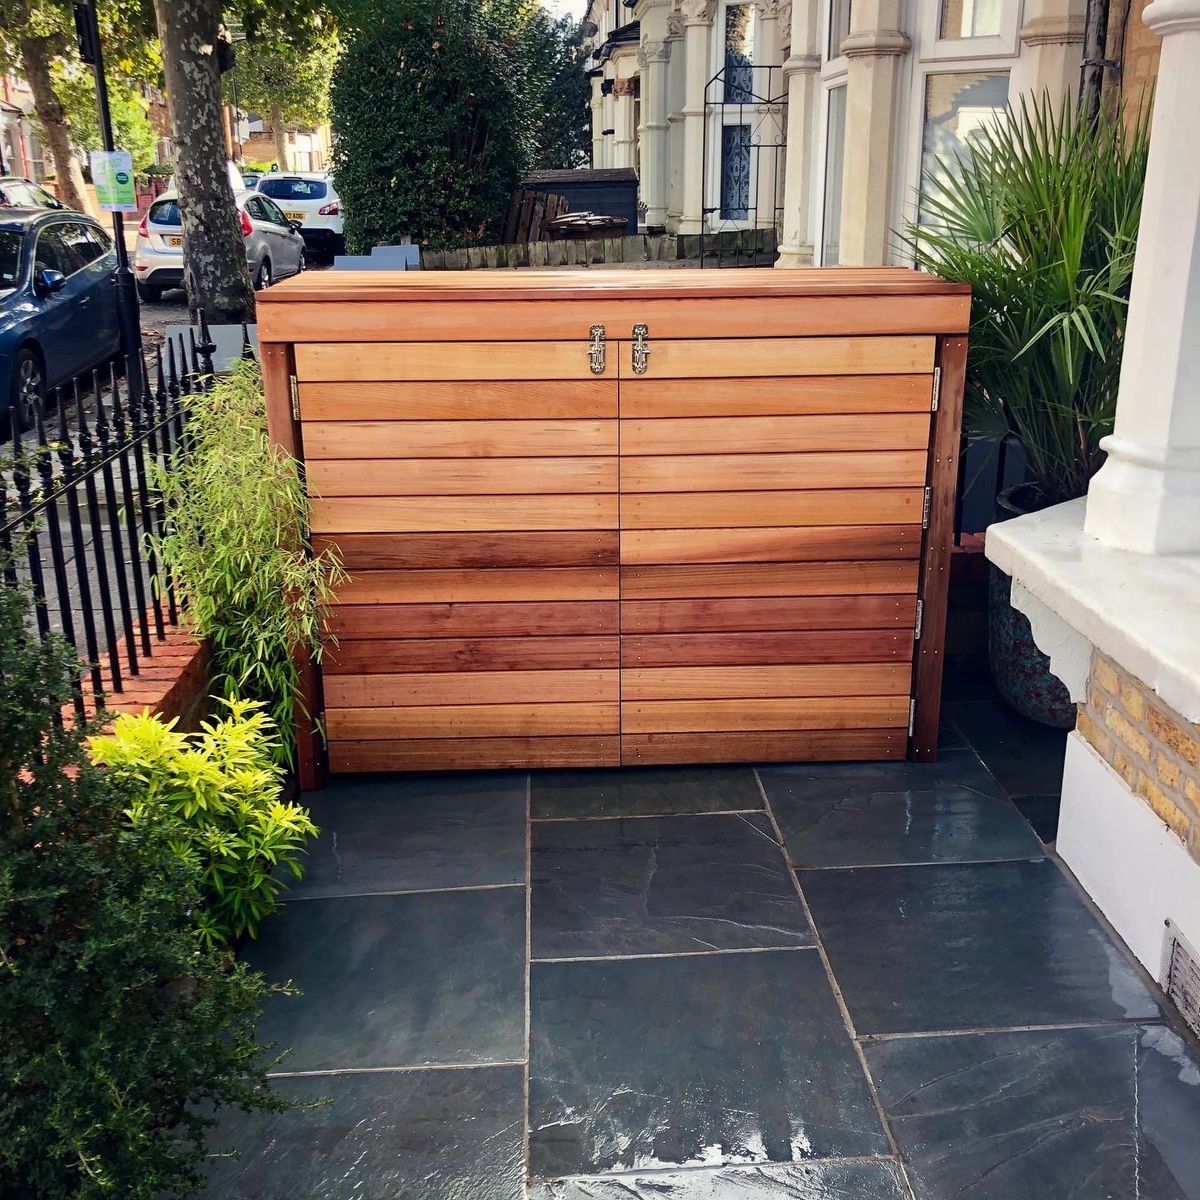 Bespoke Cedar Bin Store with Stainless Steel Fixtures that is Practical but Well Designed for a Small Front Yard